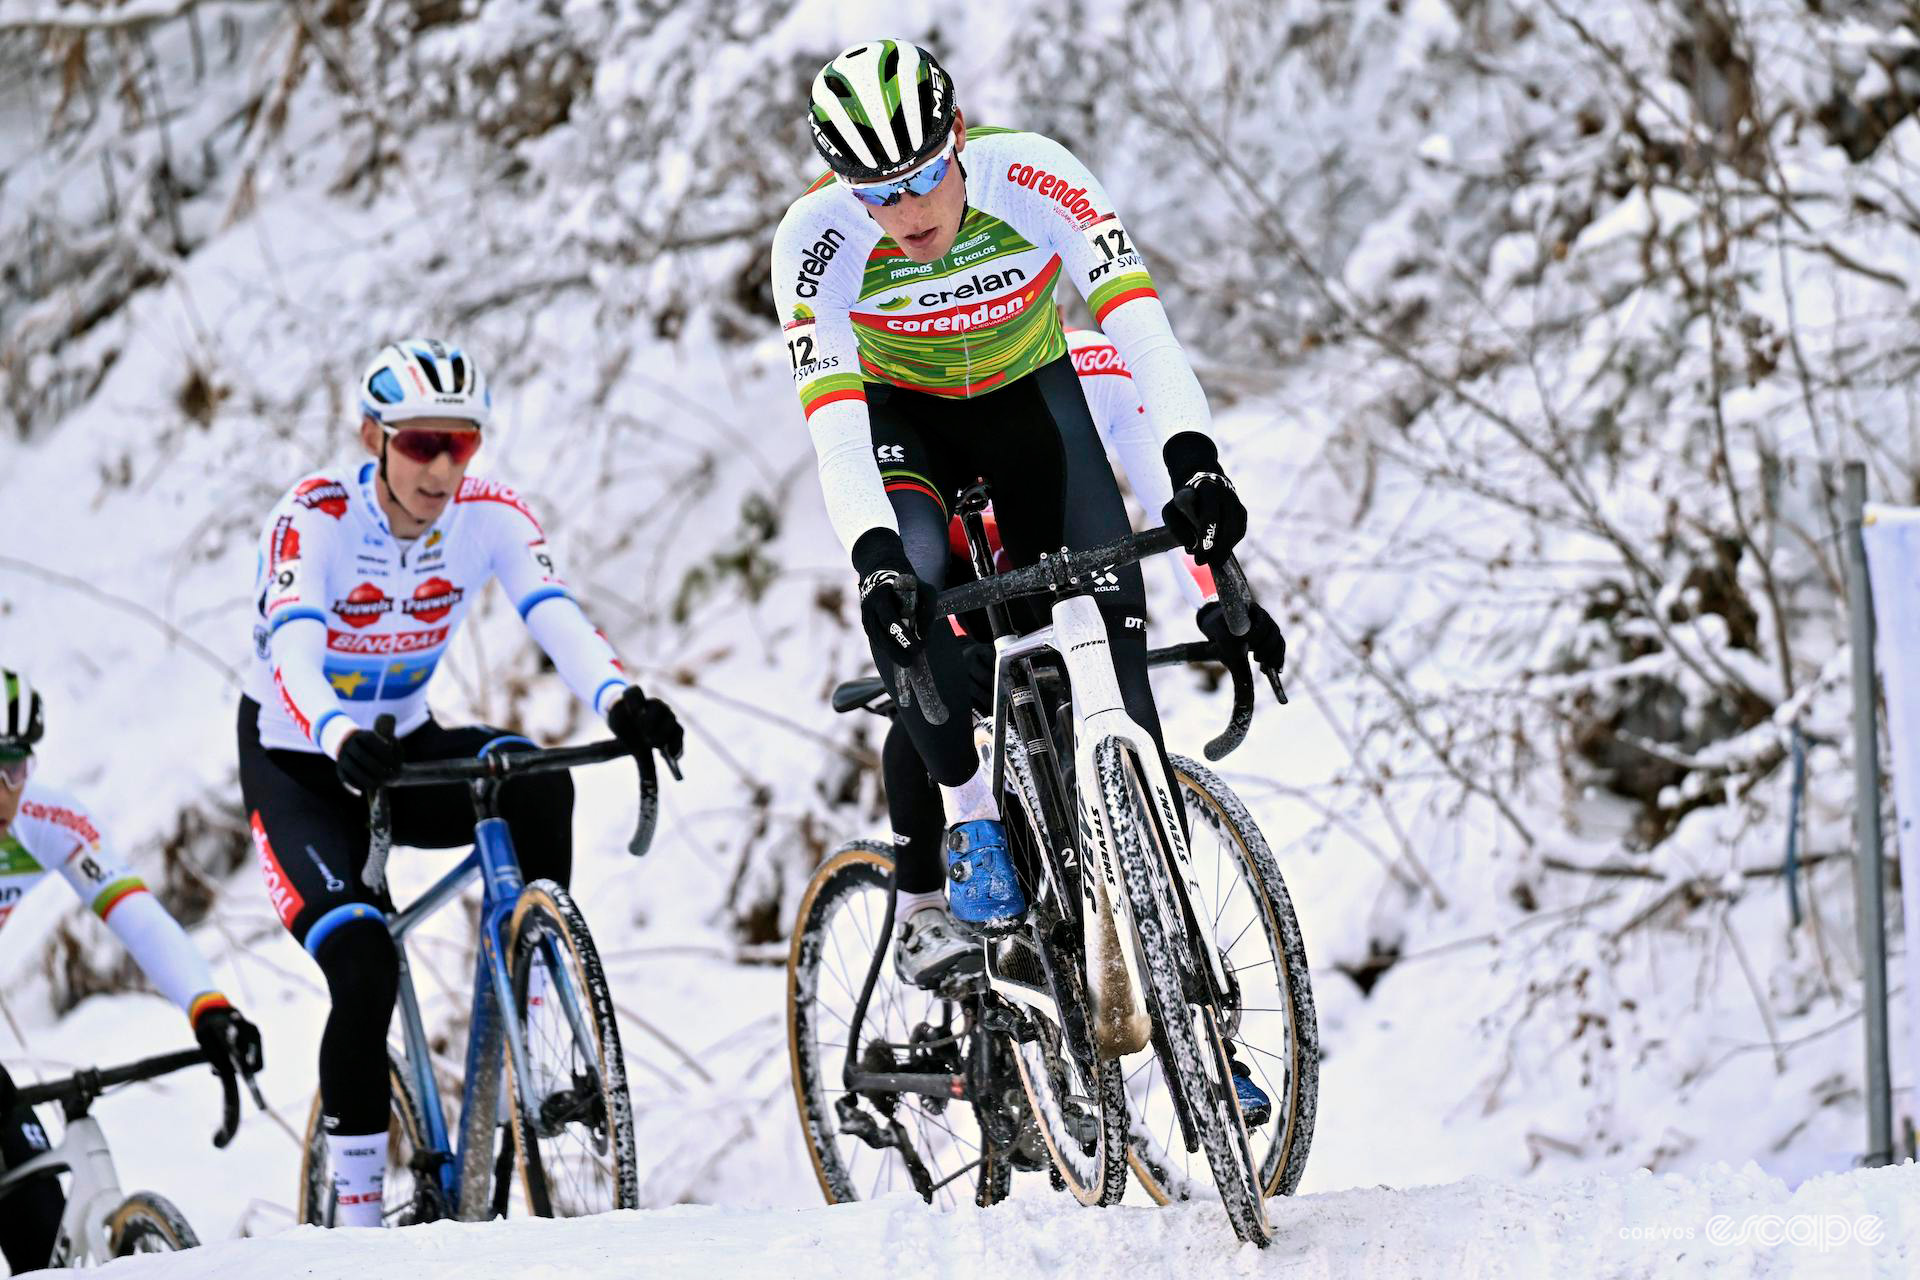 Joran Wyseure leads a group including European champion Michael Vanthourenhout over the snow during UCI Cyclocross World Cup Val di Sole.